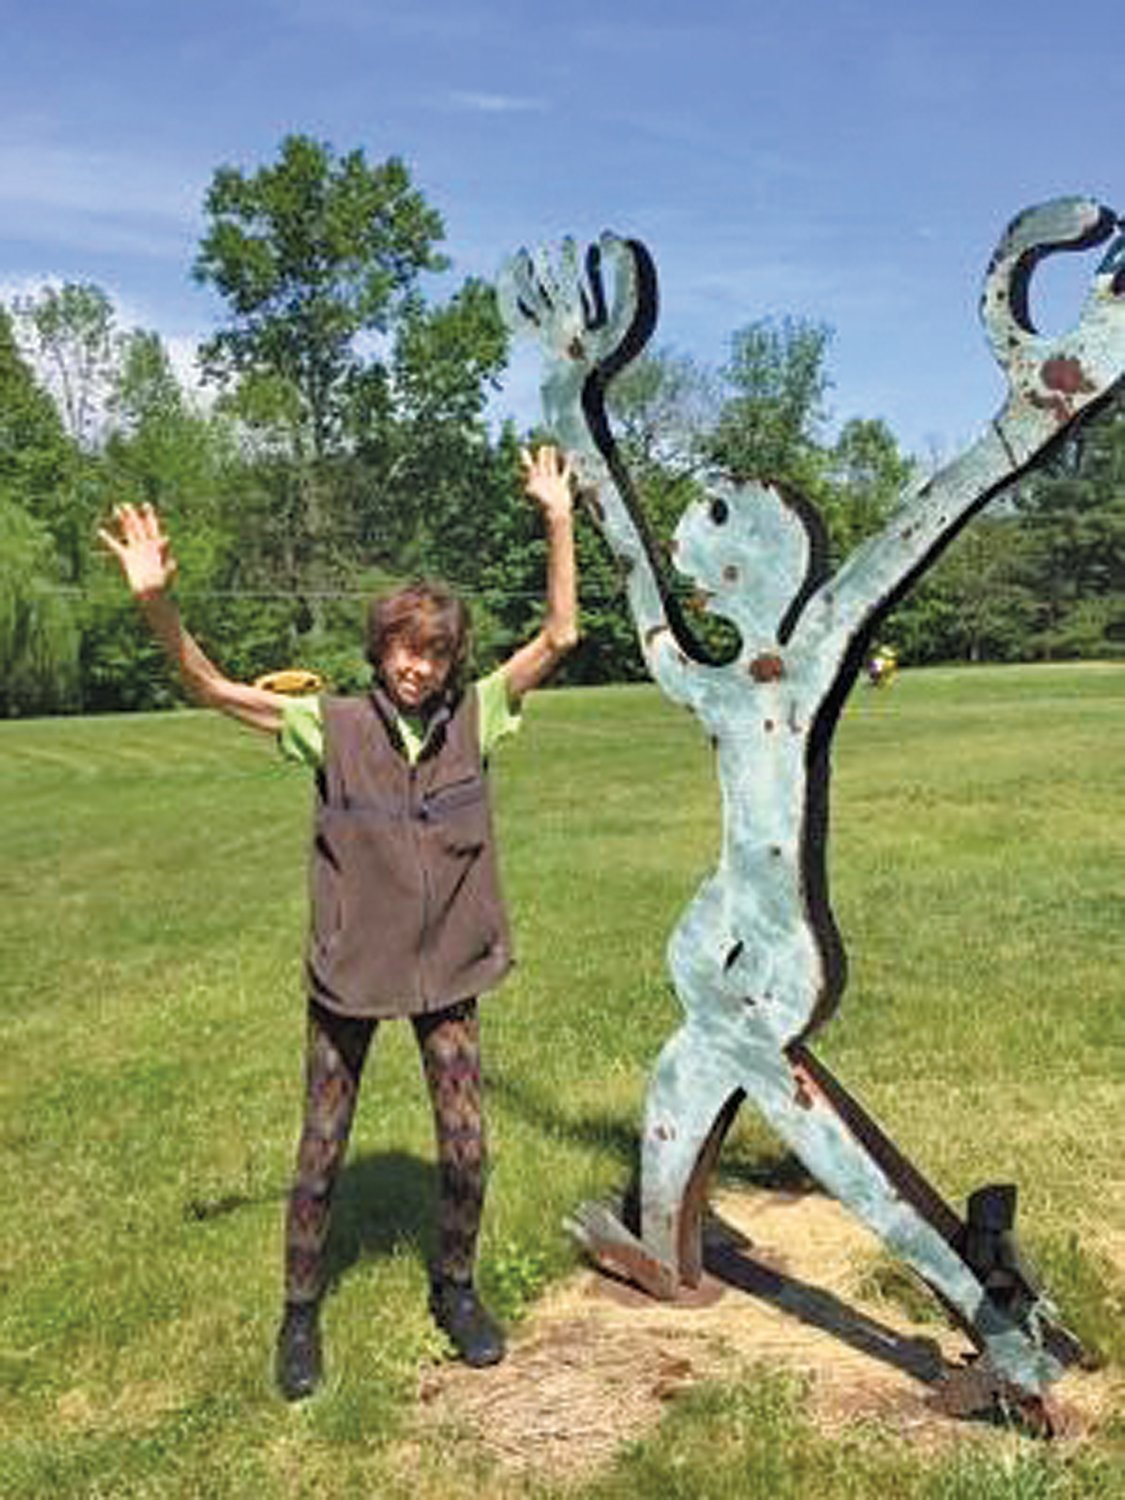 Dr. Fagan, a retired biochemistry professor, has a lot of fun with her lawn sculptures.